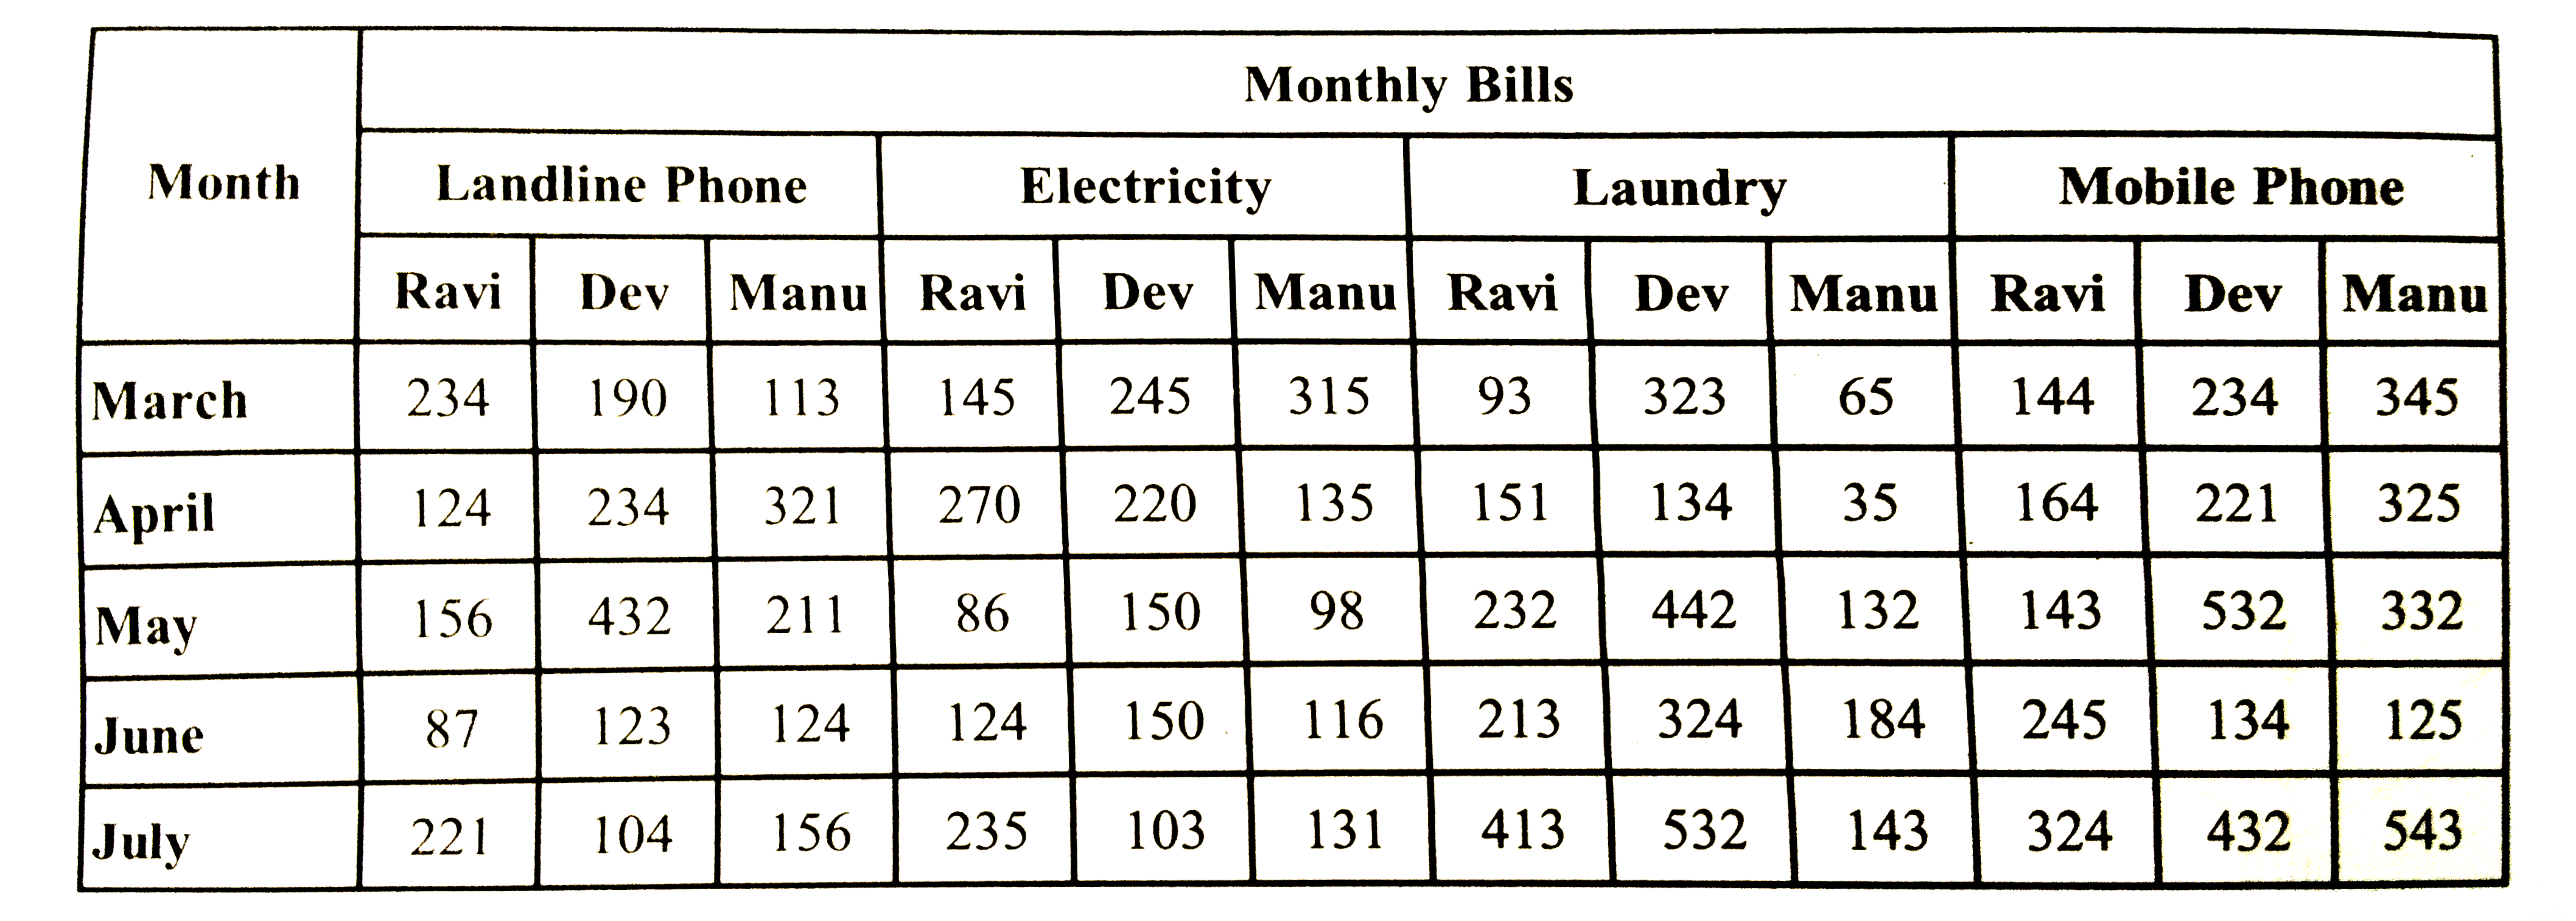 In which months respectively did Manu  pay the second highest mobile phone bill and the lowest electricity bill ?